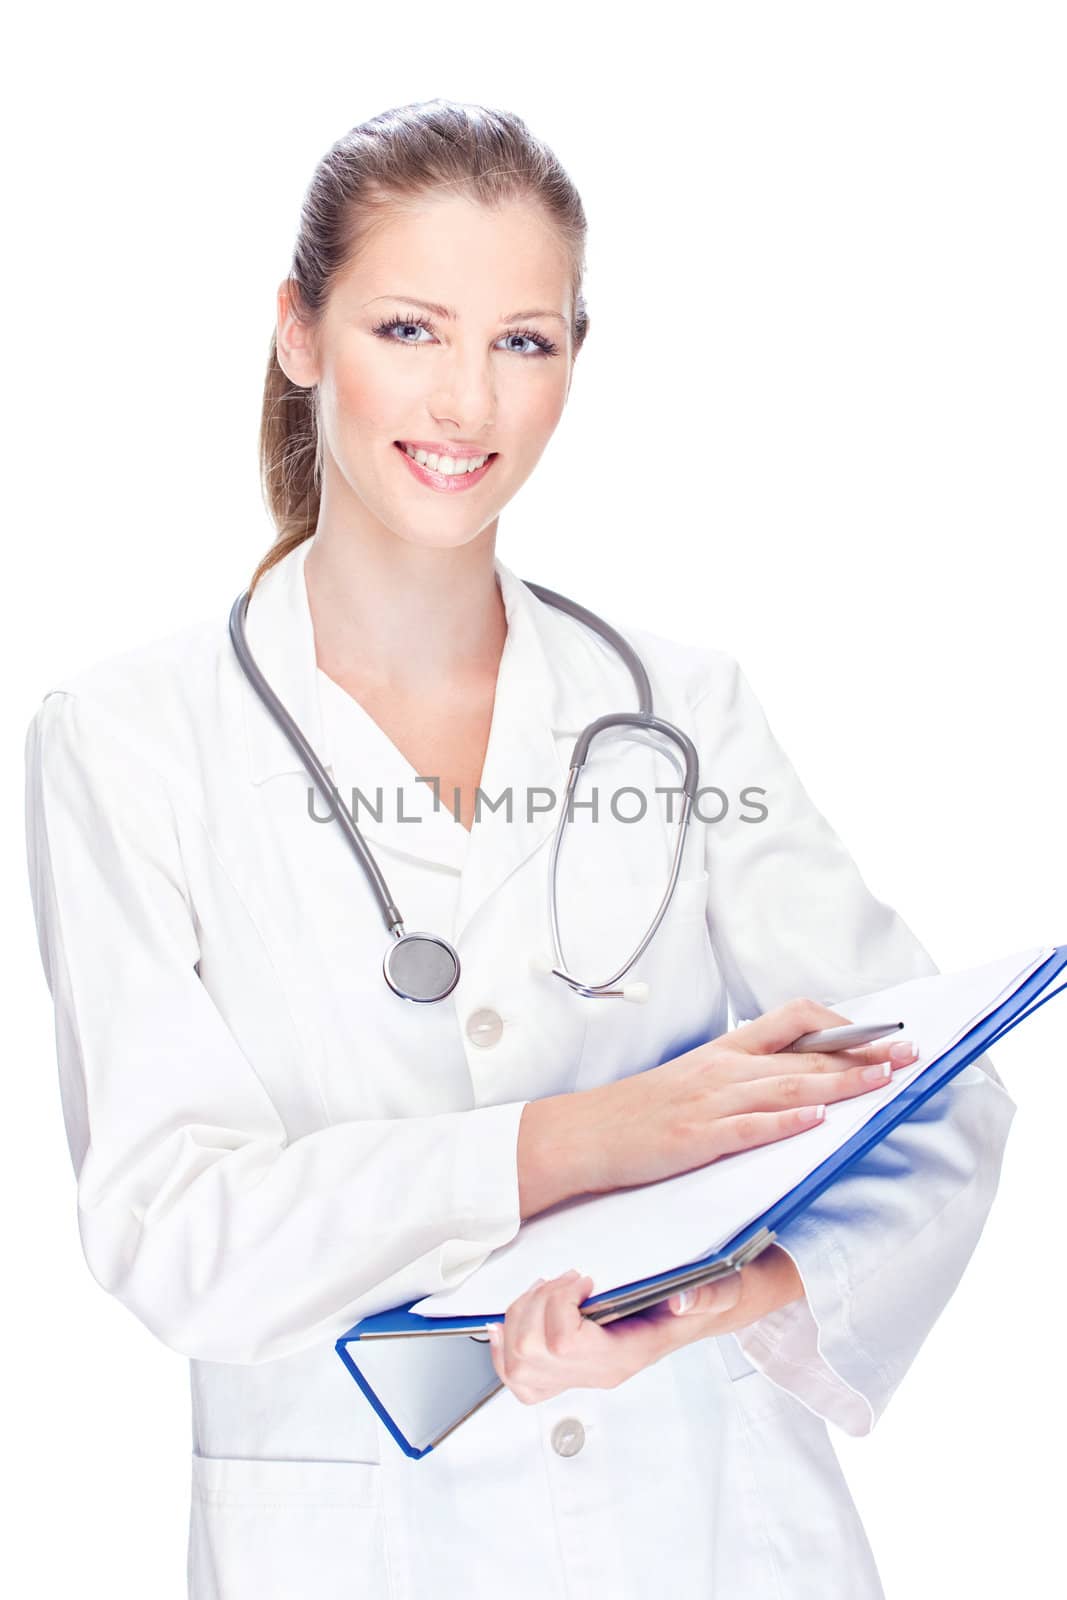 female doctor with papers and stethoscope by imarin